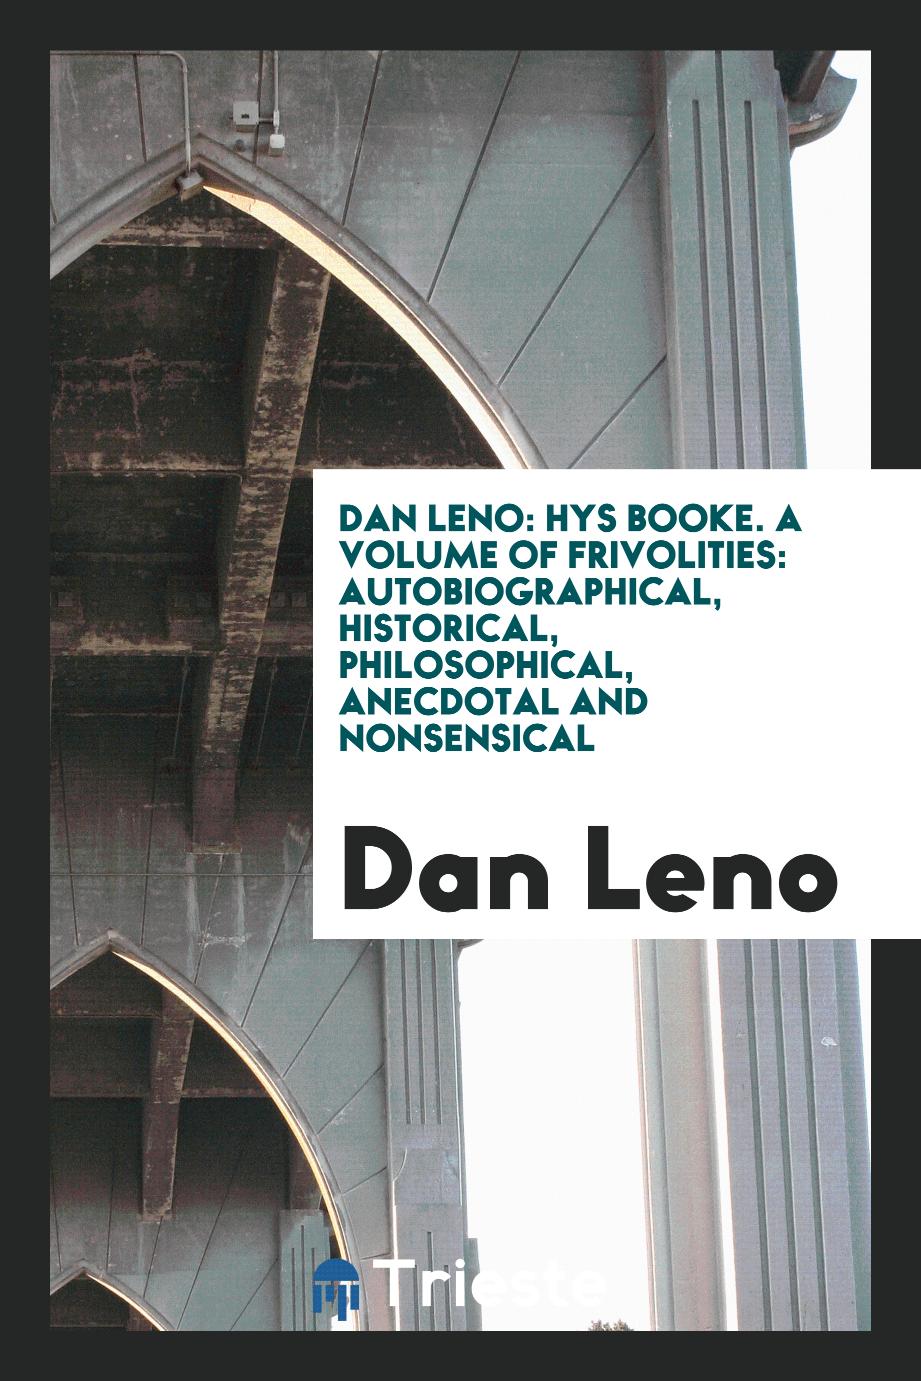 Dan Leno: Hys Booke. A Volume of Frivolities: Autobiographical, Historical, Philosophical, Anecdotal and Nonsensical